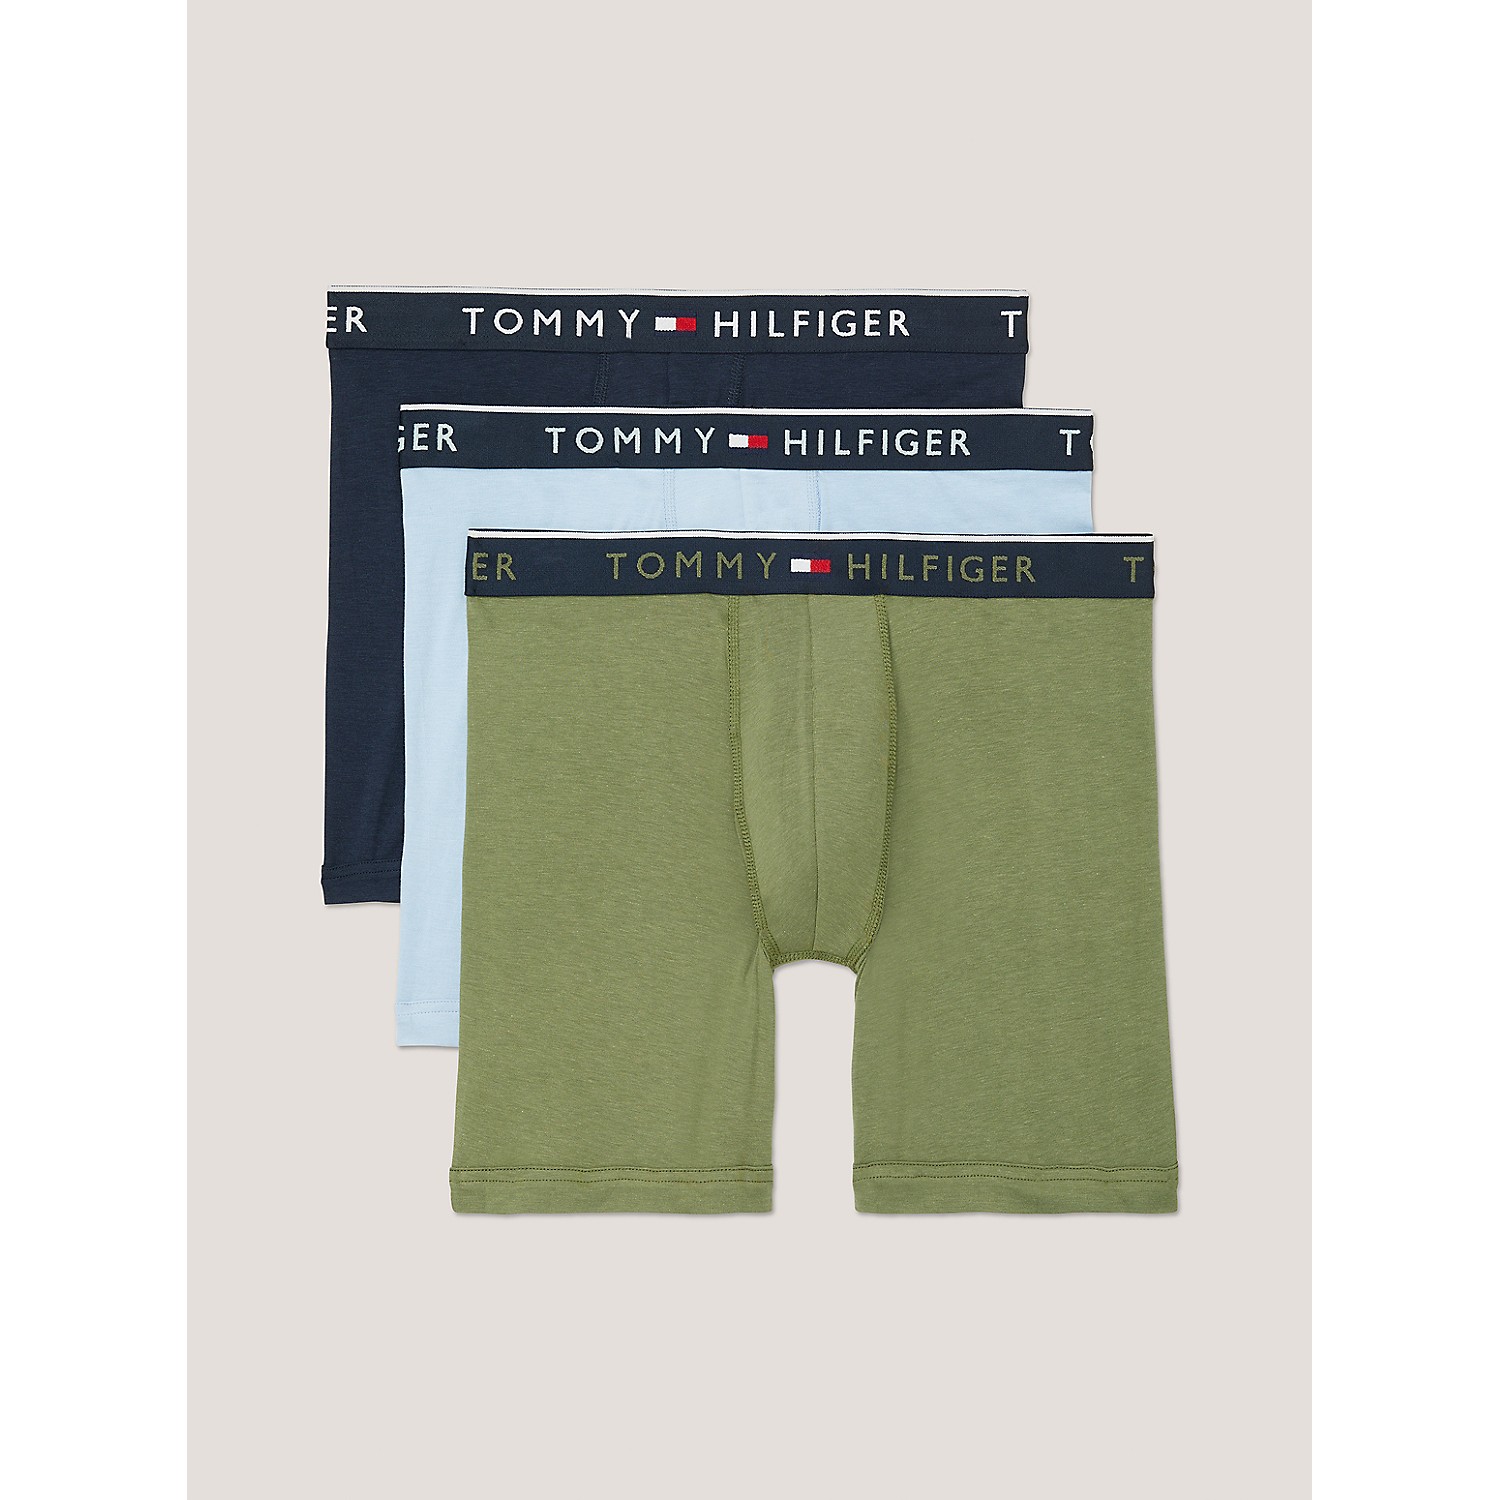 TOMMY HILFIGER Essential Luxe Stretch Boxer Brief 3-Pack